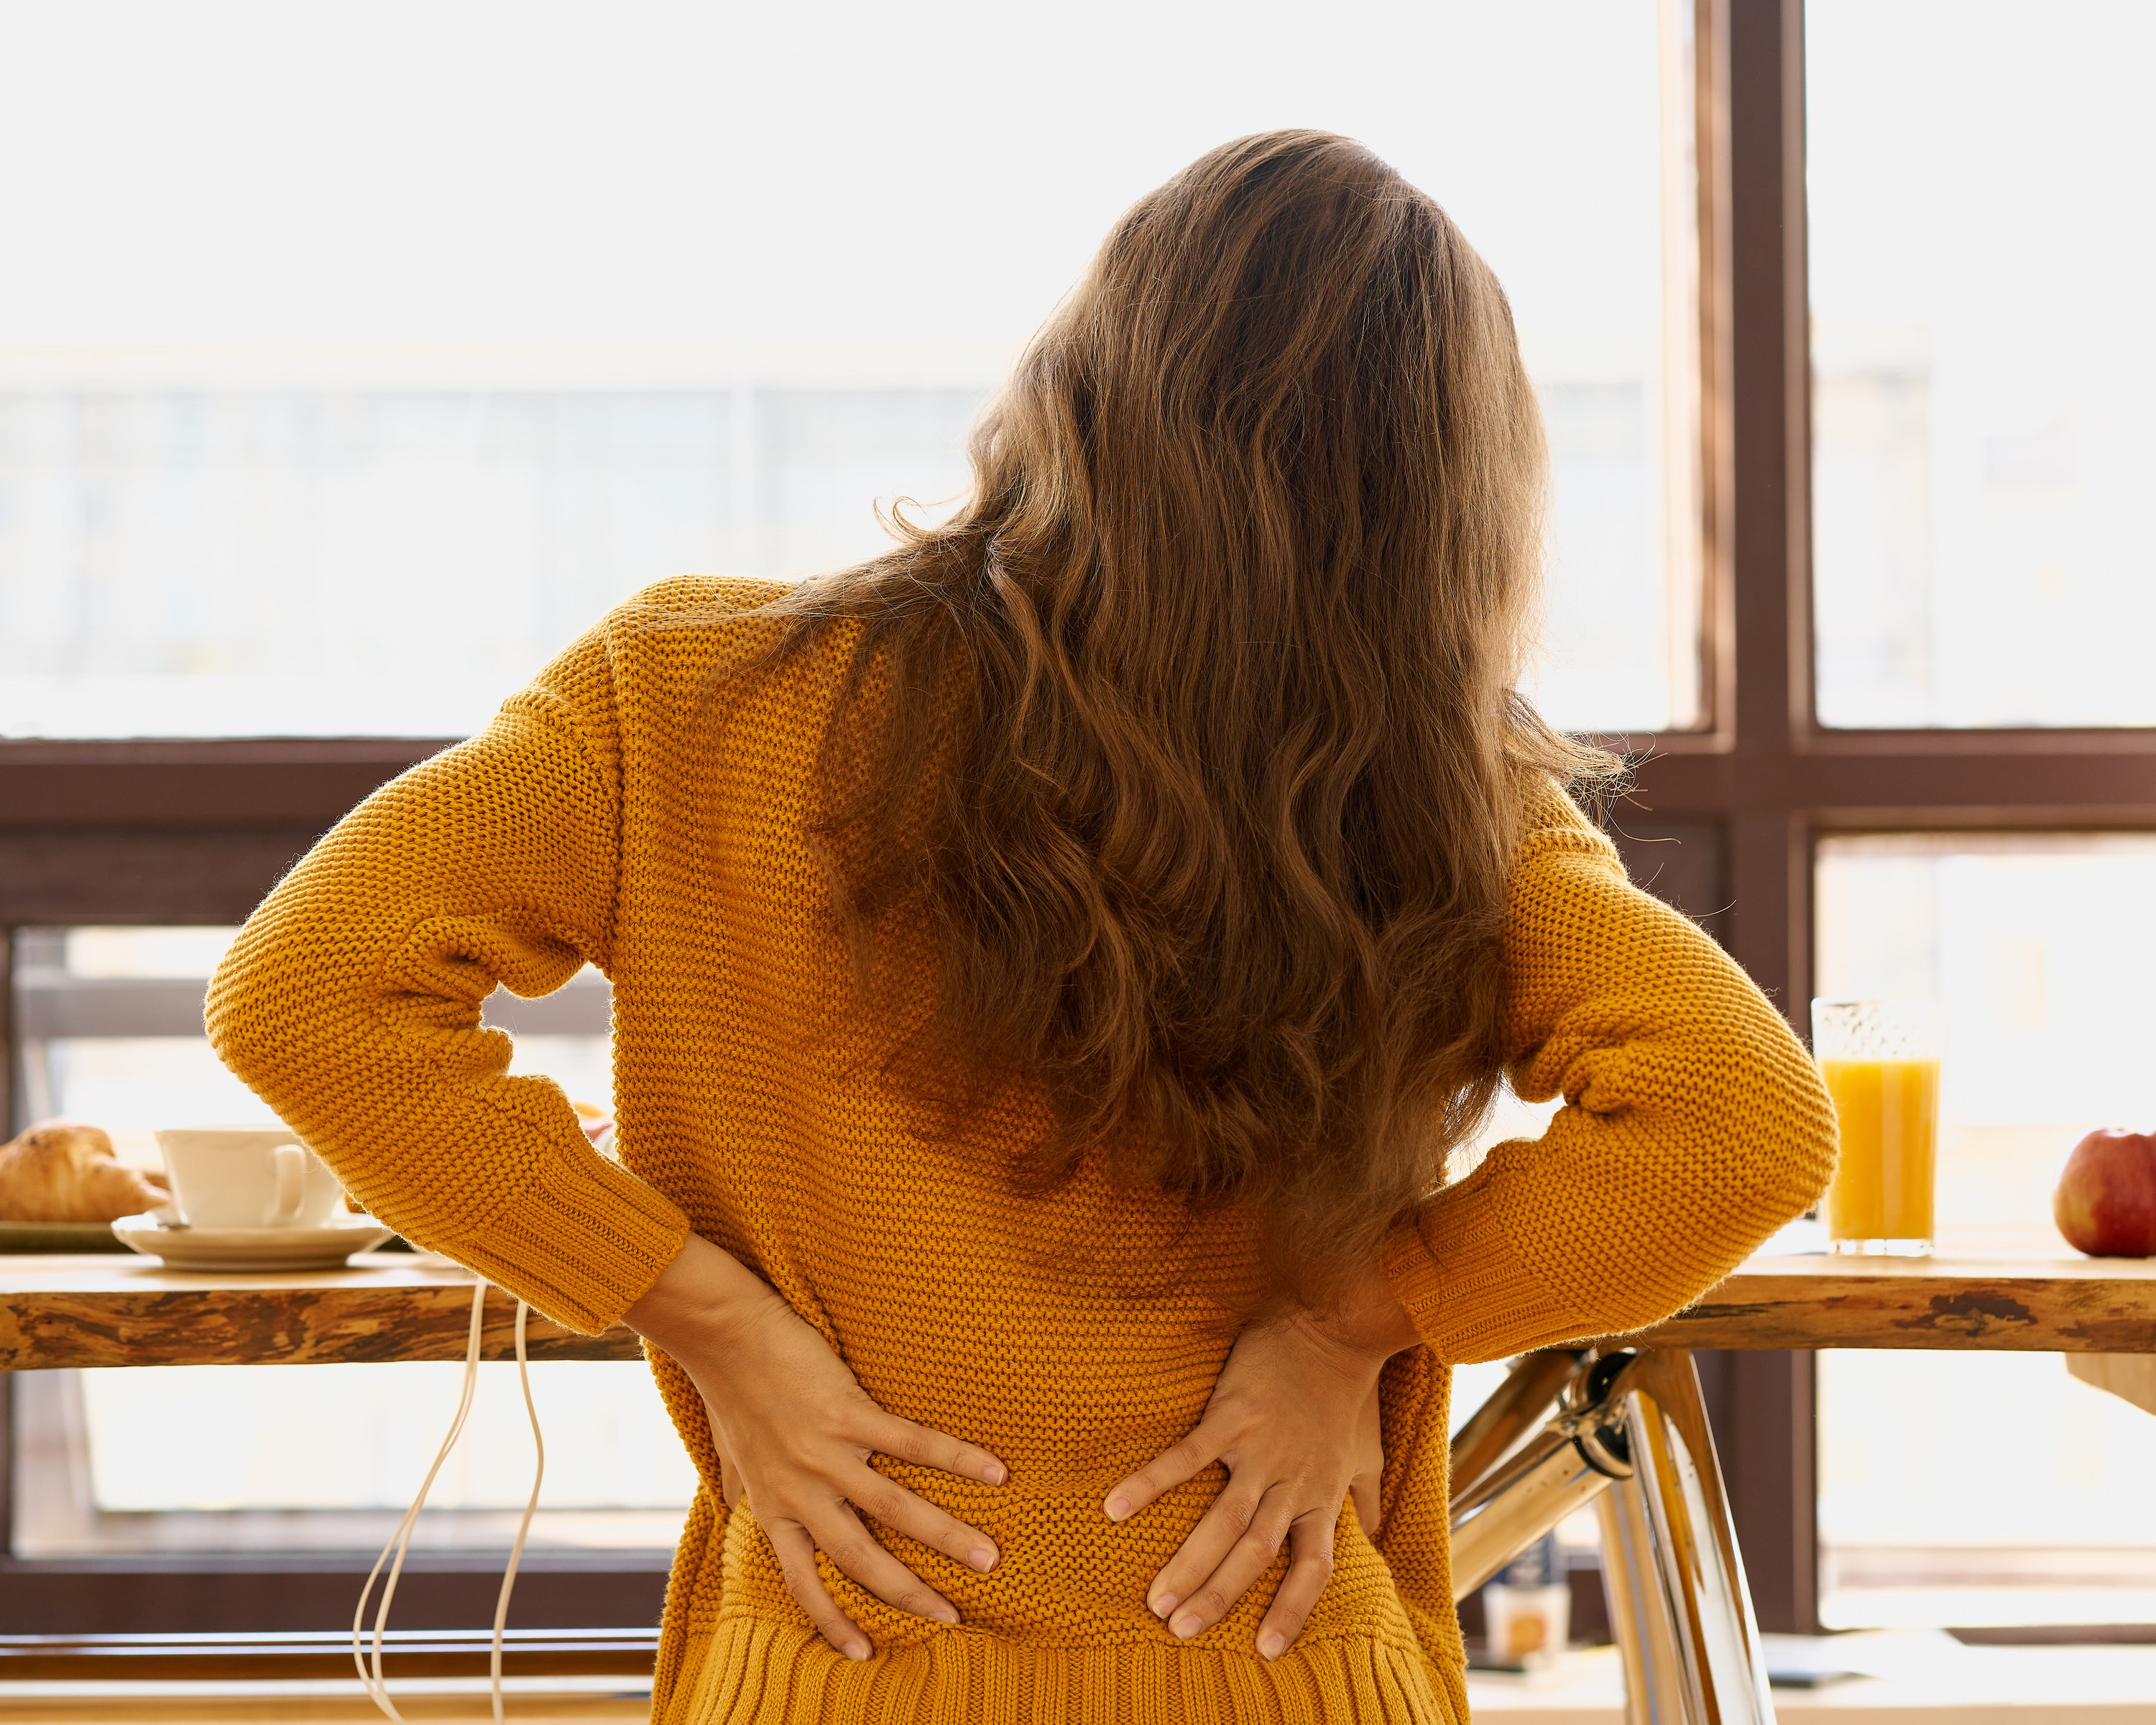 Photo of a woman in a yellow sweater stretching her back